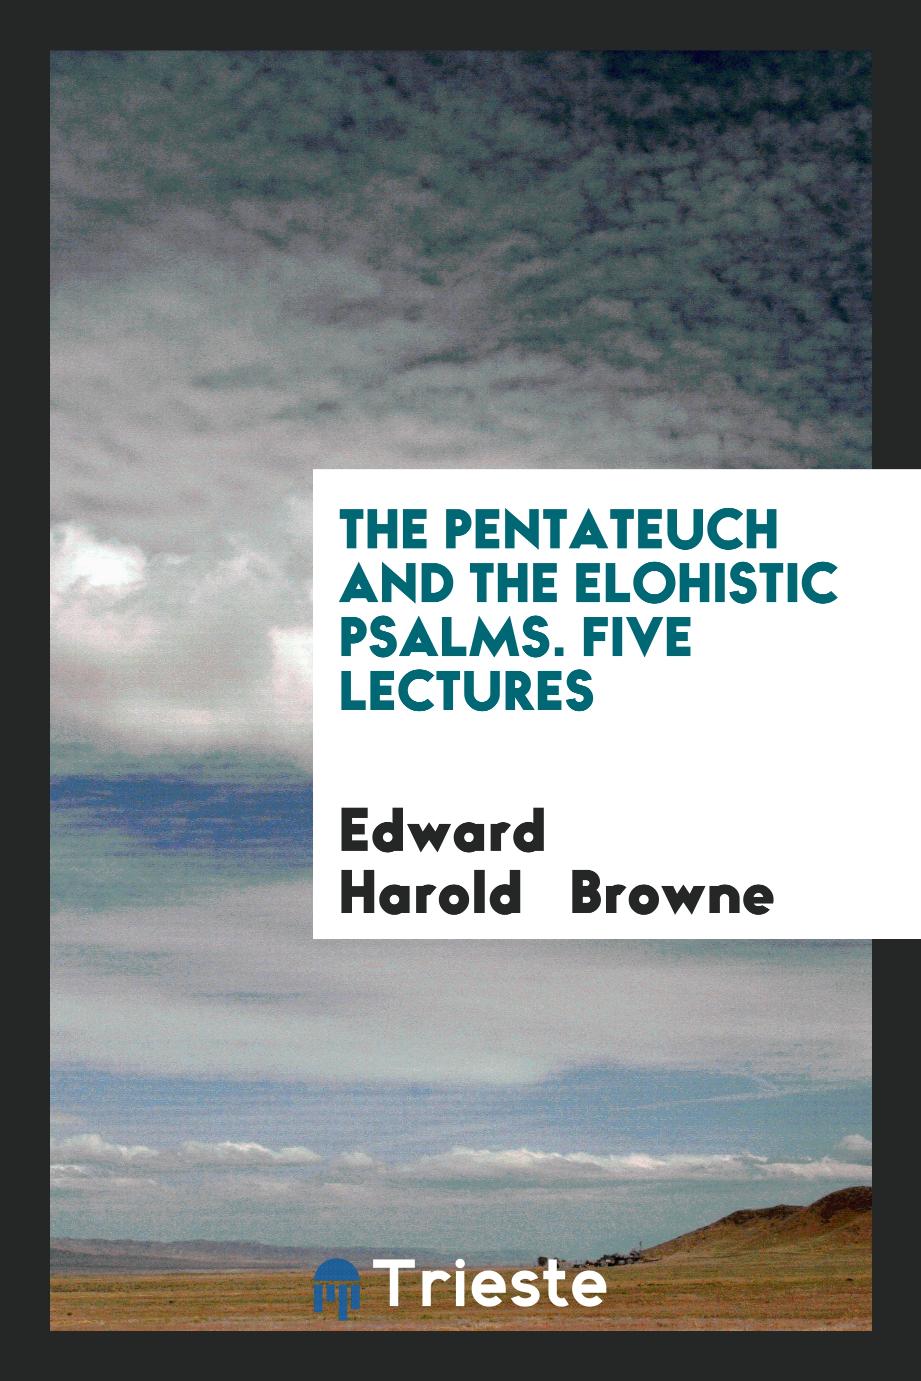 The Pentateuch and the Elohistic Psalms. Five Lectures